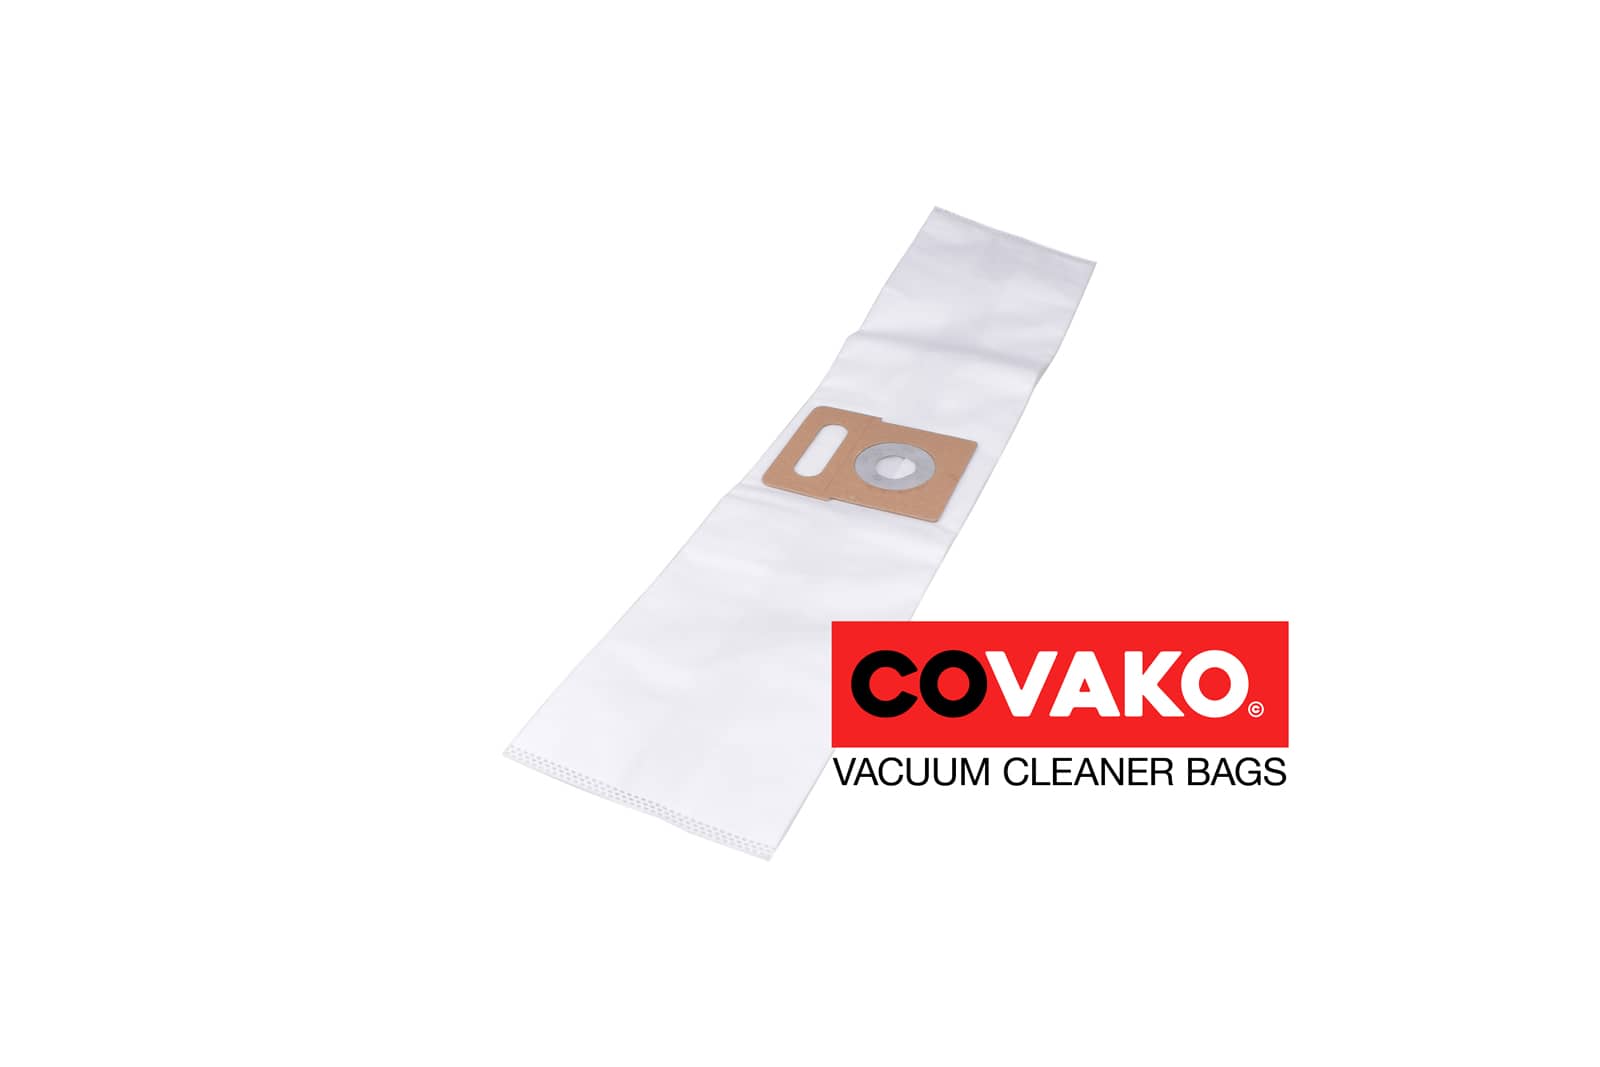 Oehme Otto 643533 / Synthesis - Oehme Otto vacuum cleaner bags